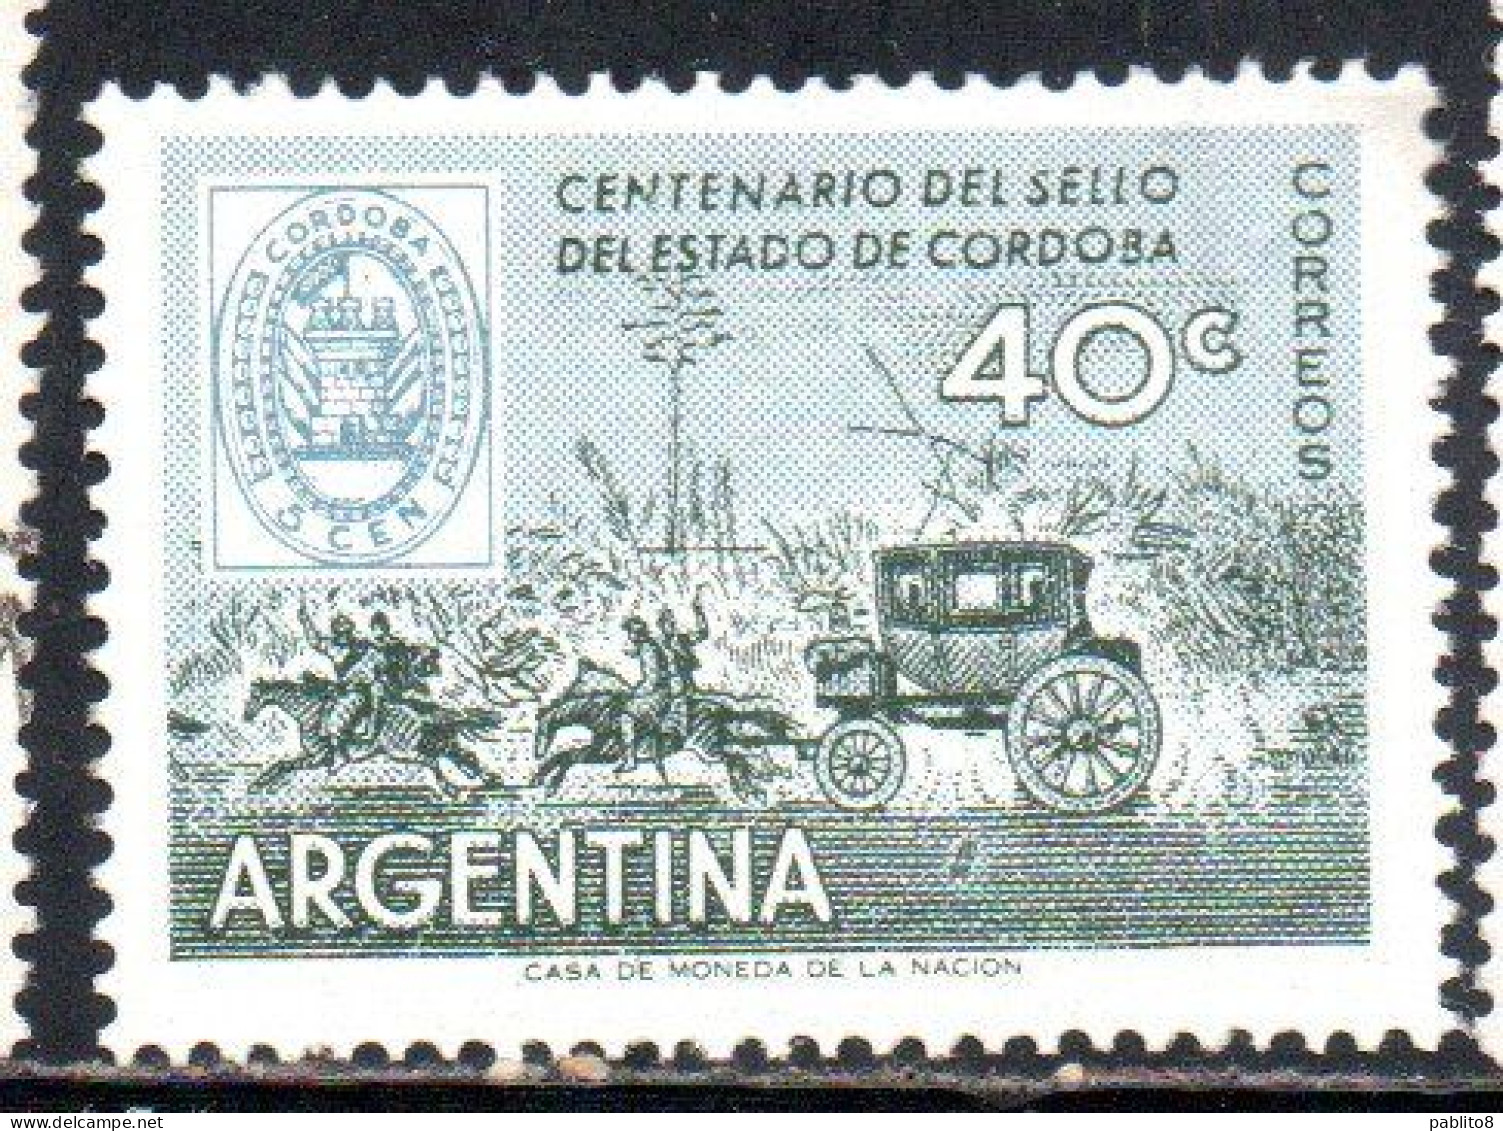 ARGENTINA 1958 CENTENARY OF CORDOBA POSTAGE STAMPS STAMP AND MAIL COACH 40c MNH - Nuovi